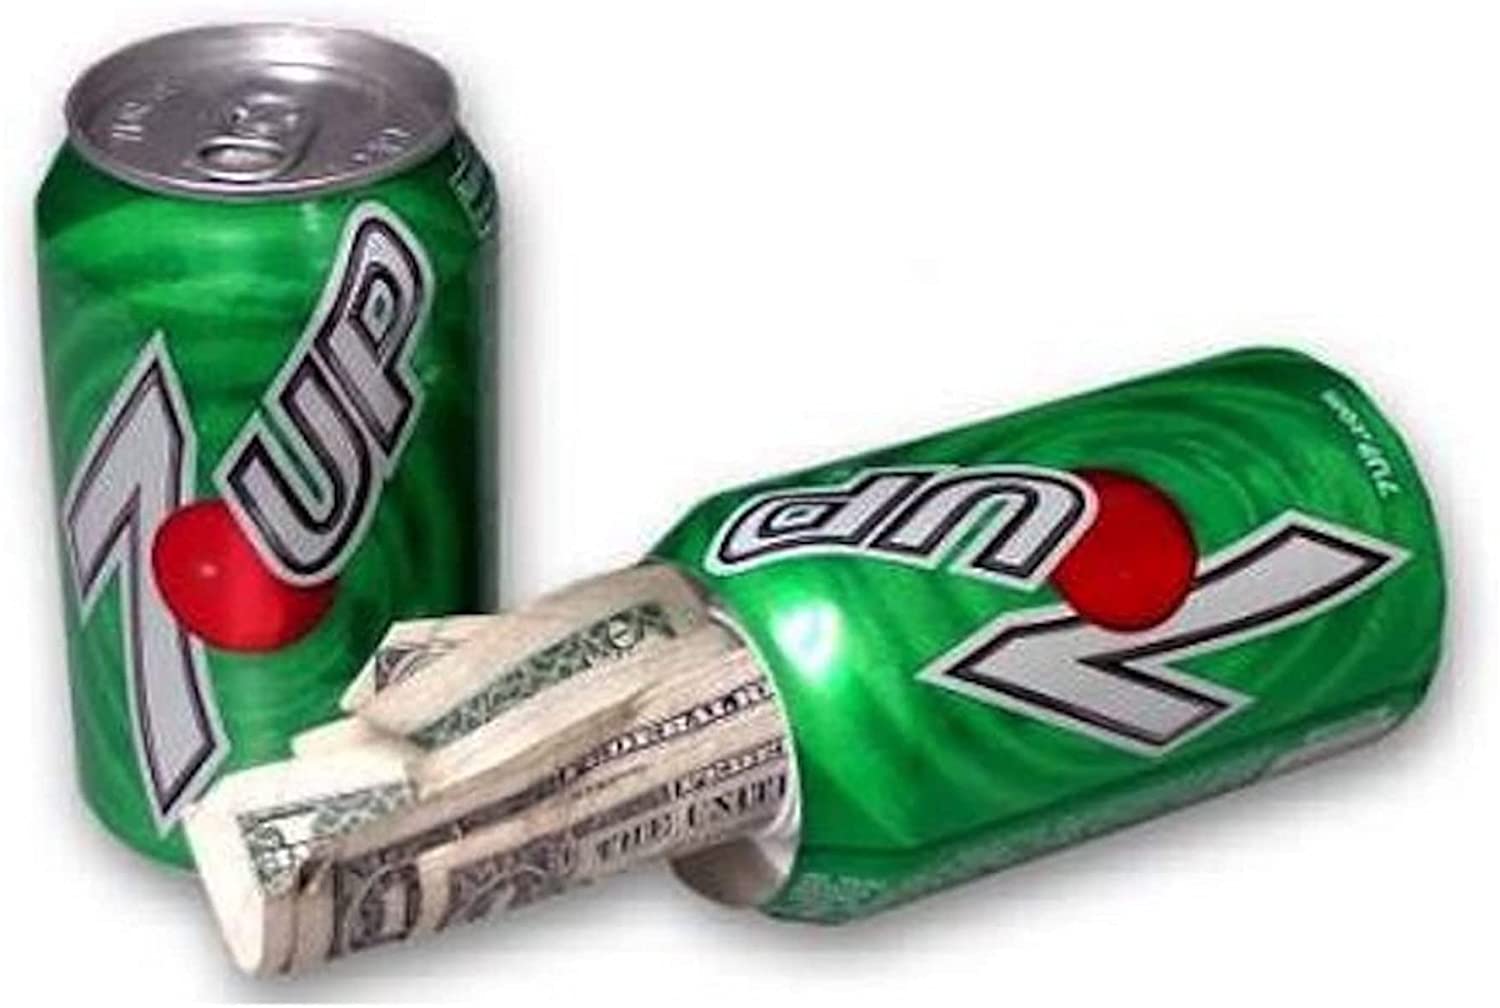 7-up Soda Pop Can Safe #7UP